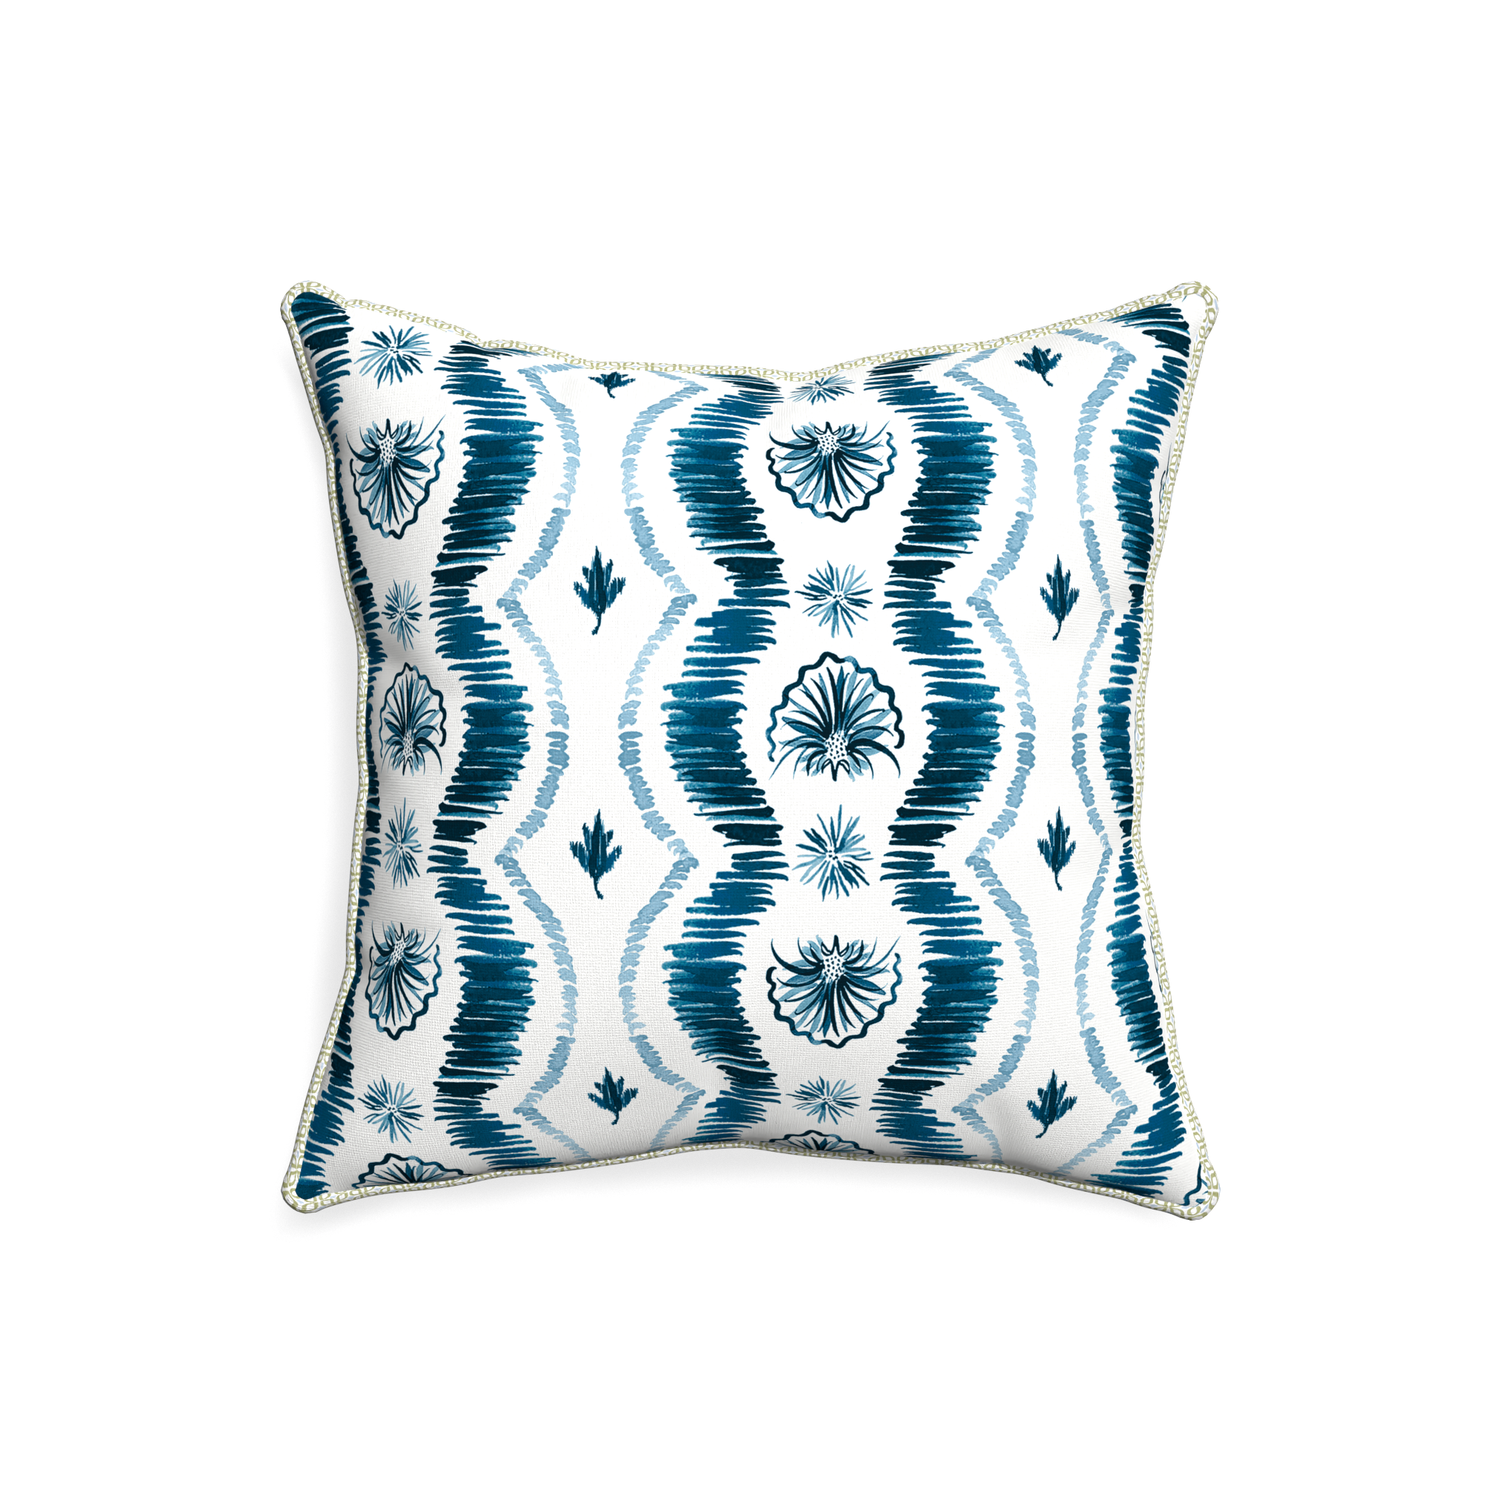 20-square alice custom blue ikatpillow with l piping on white background